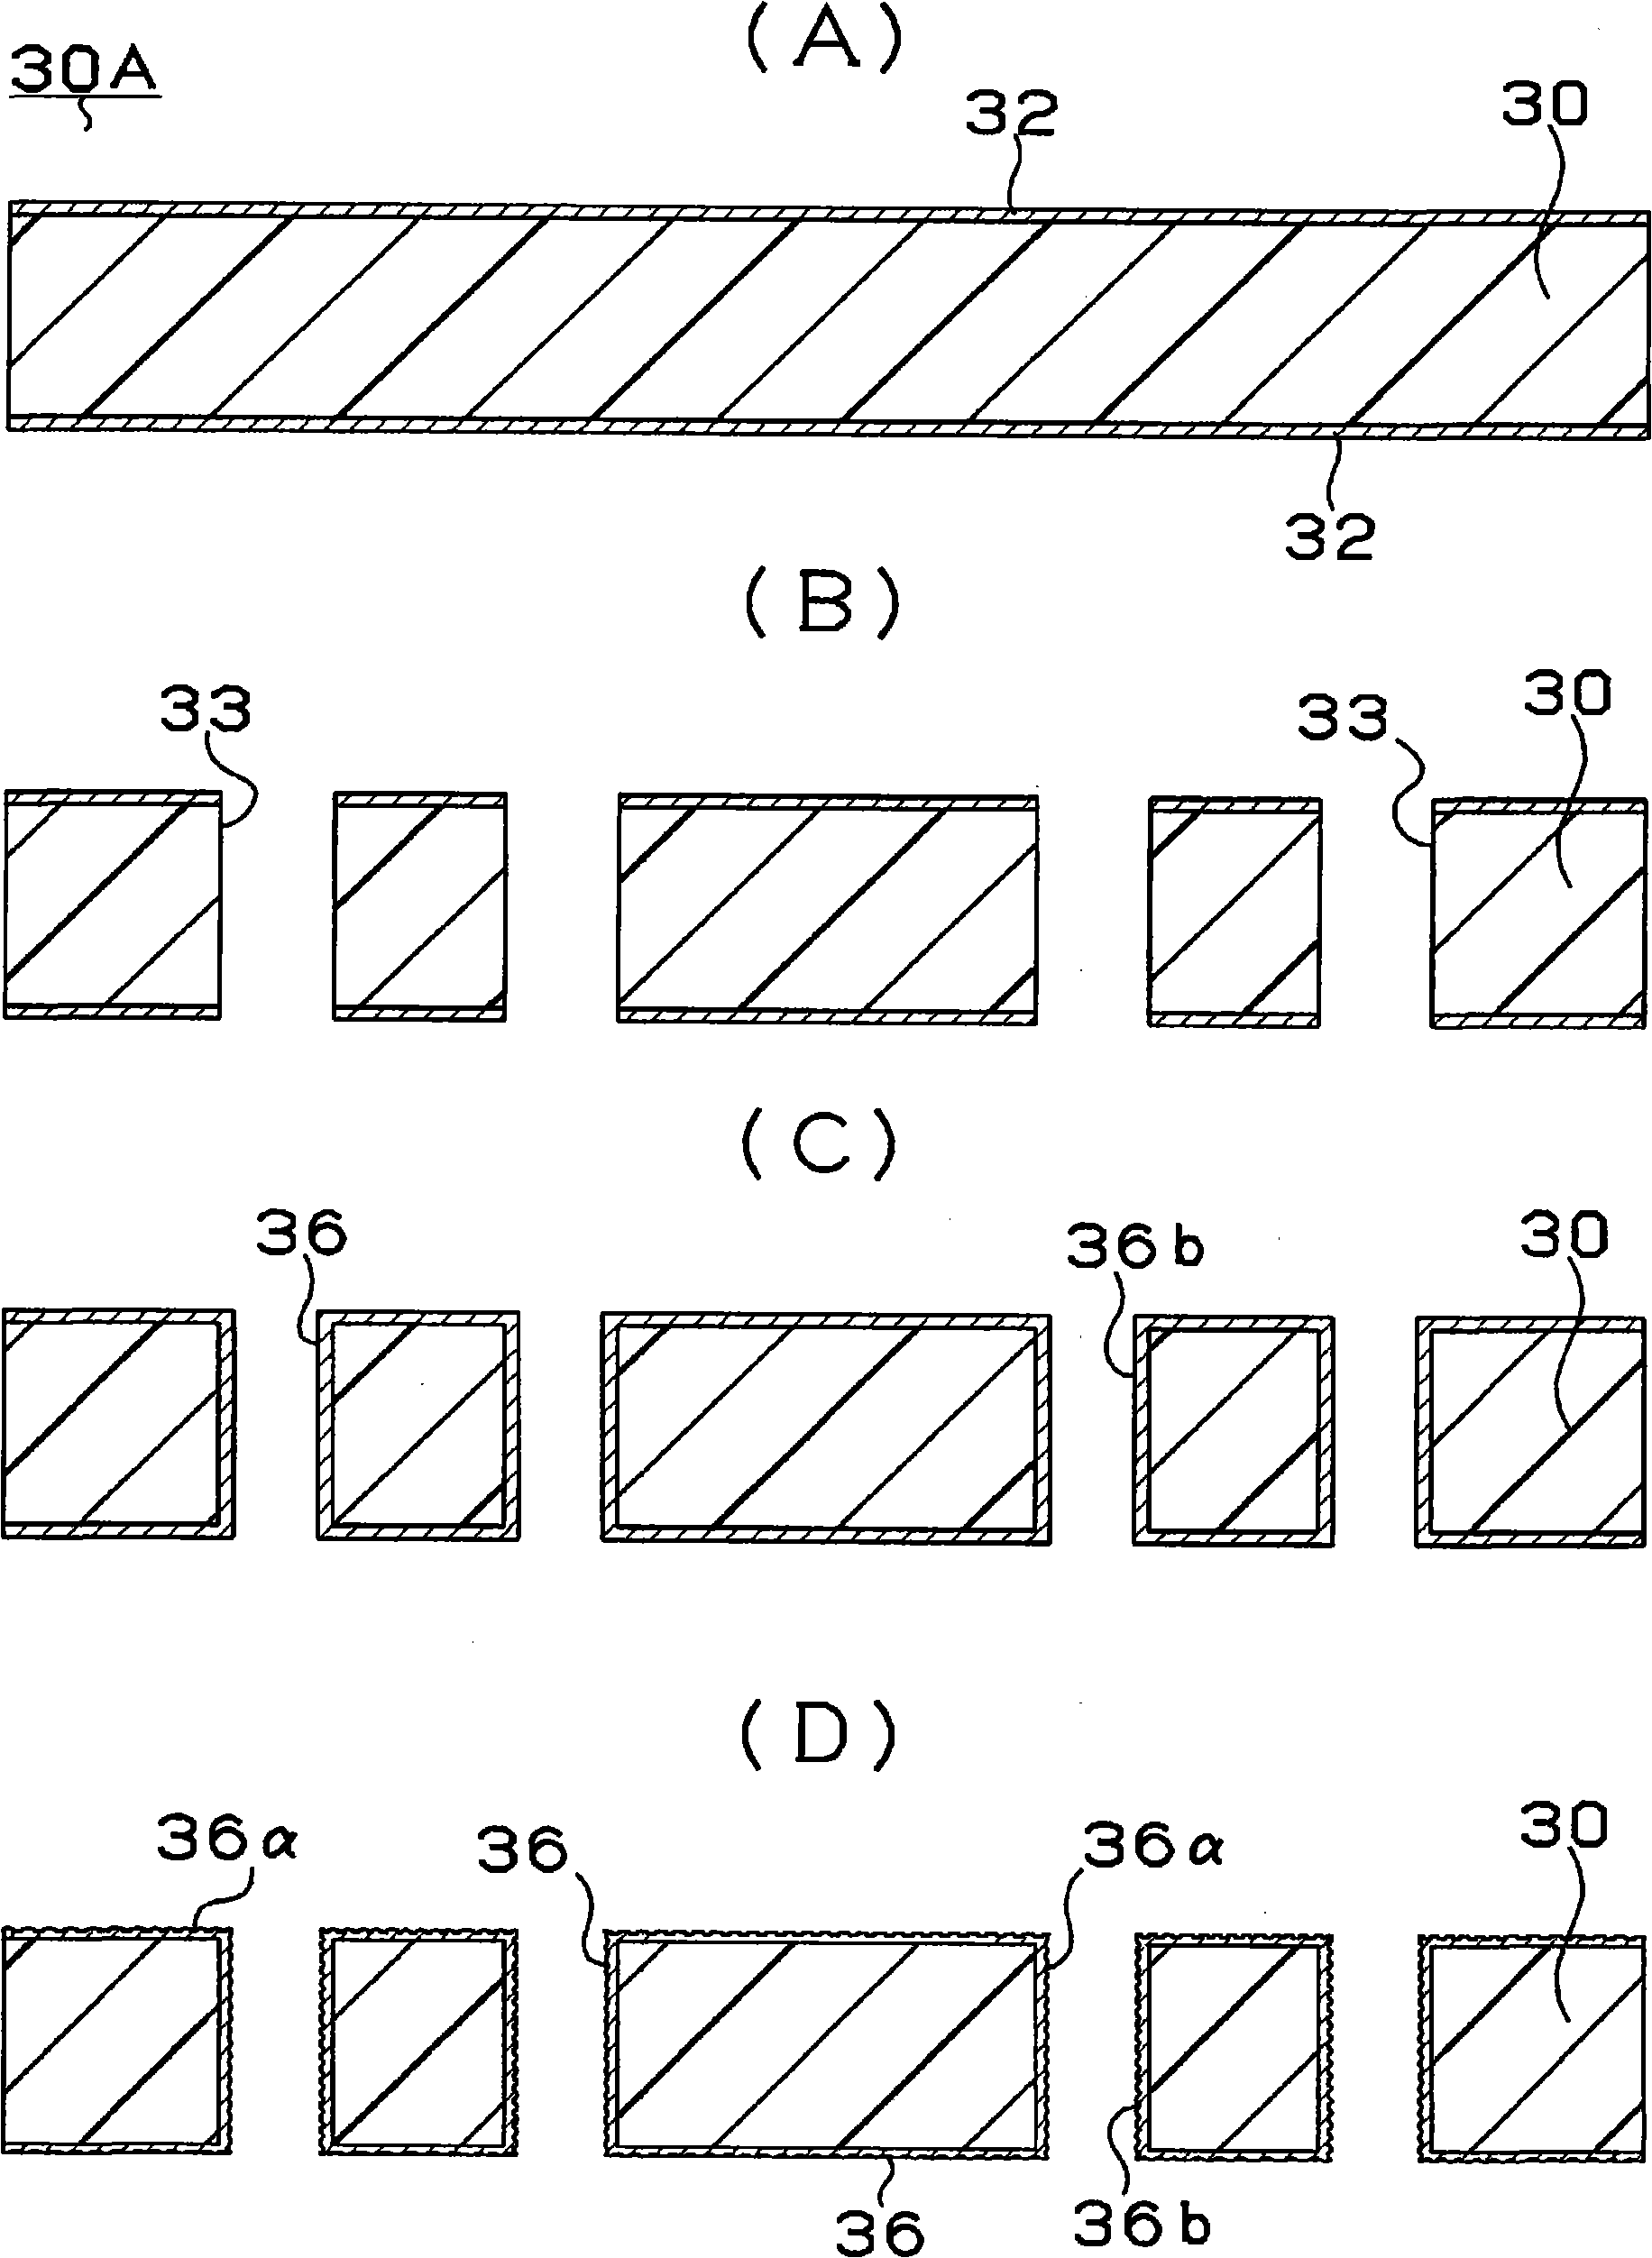 Printed-circuit board, and method for manufacturing the same